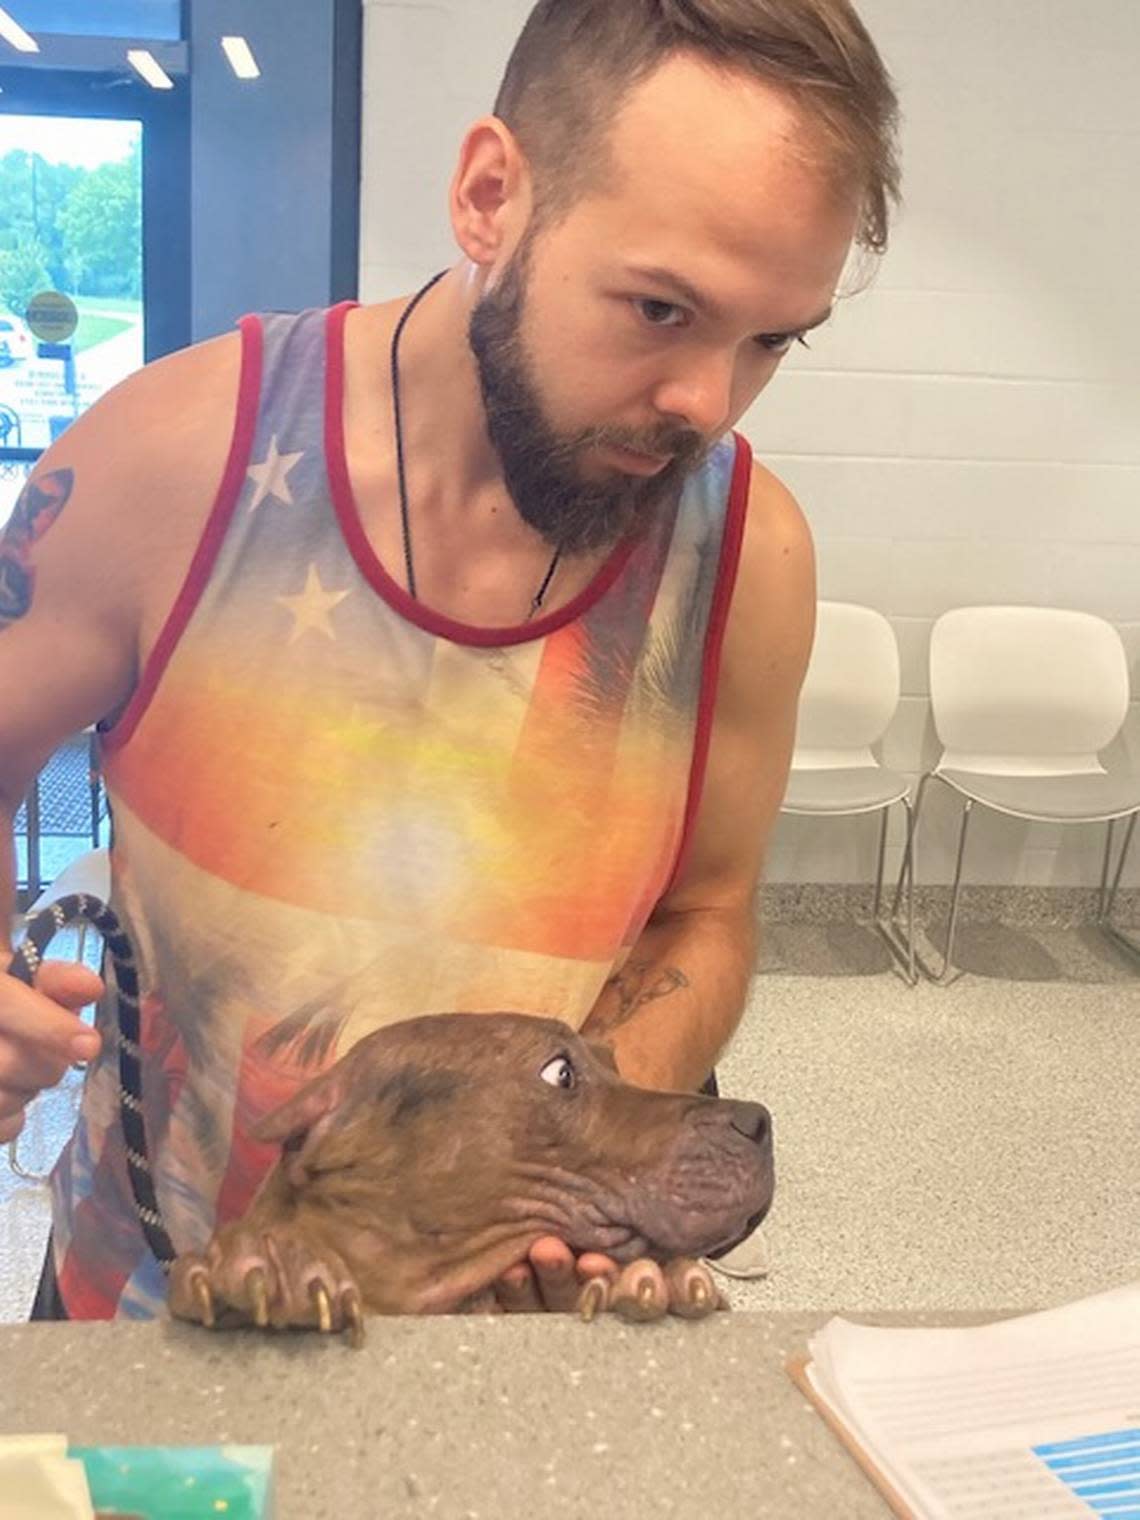 Kyle Dilley of Kansas City found this dog wandering near Kauffman Stadium and brought it into KC Pet Project, 7077 Elmwood Ave.